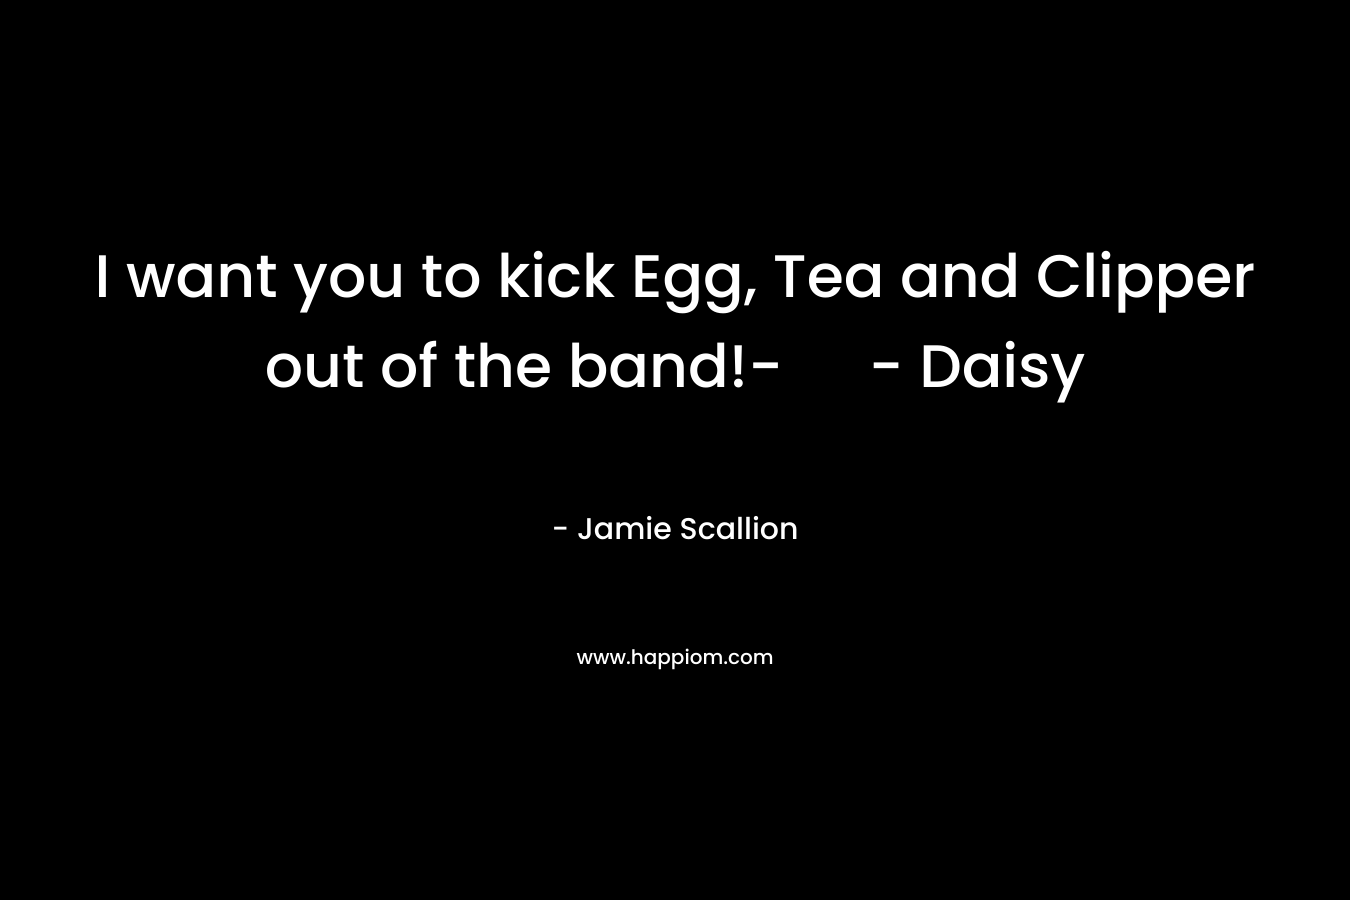 I want you to kick Egg, Tea and Clipper out of the band!- - Daisy